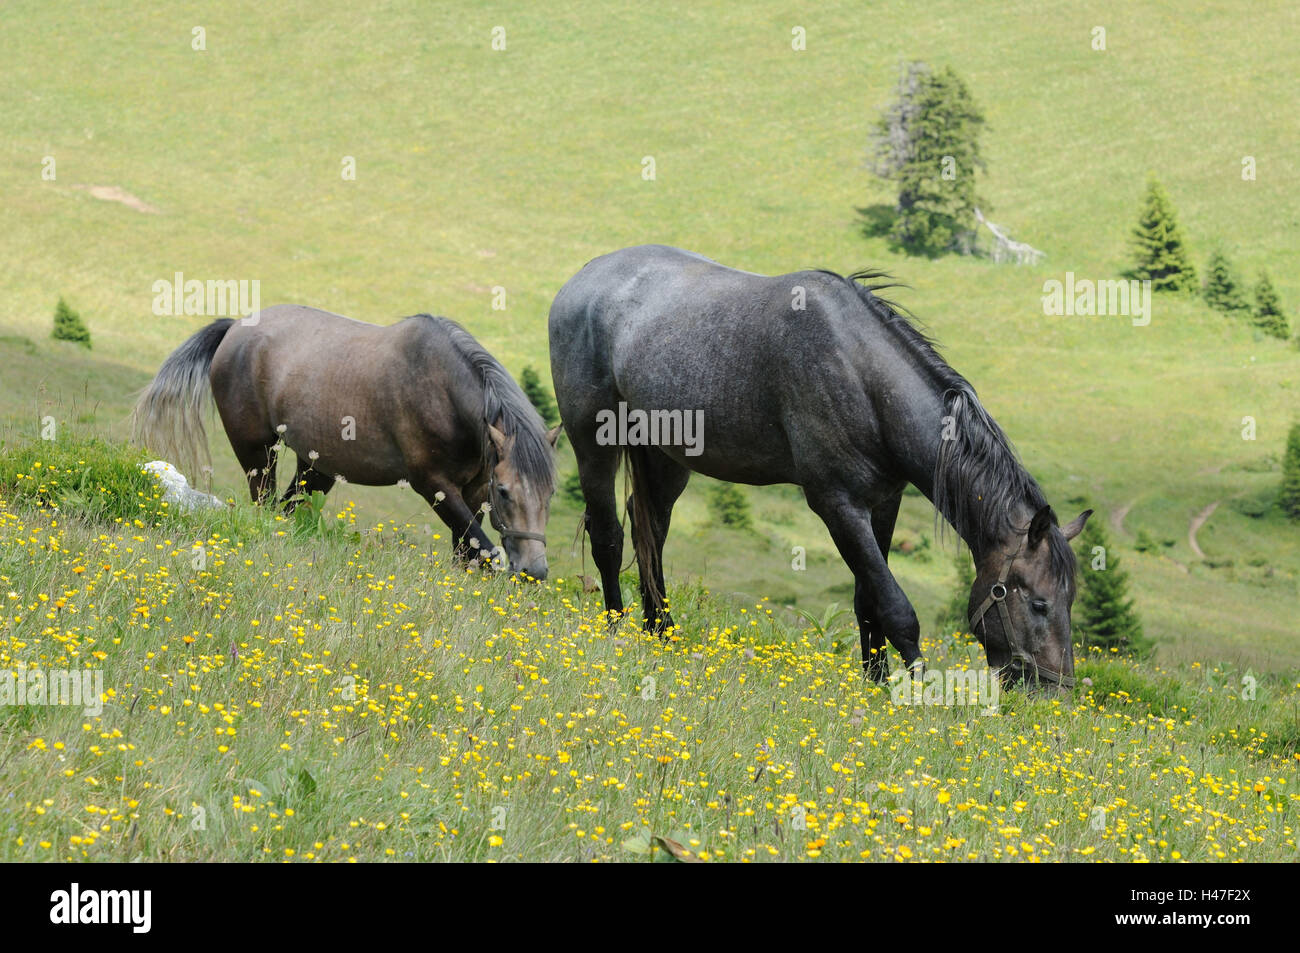 Domestic horses, Equus ferus caballus, side view, stand, eat, flower meadow, scenery, Stock Photo